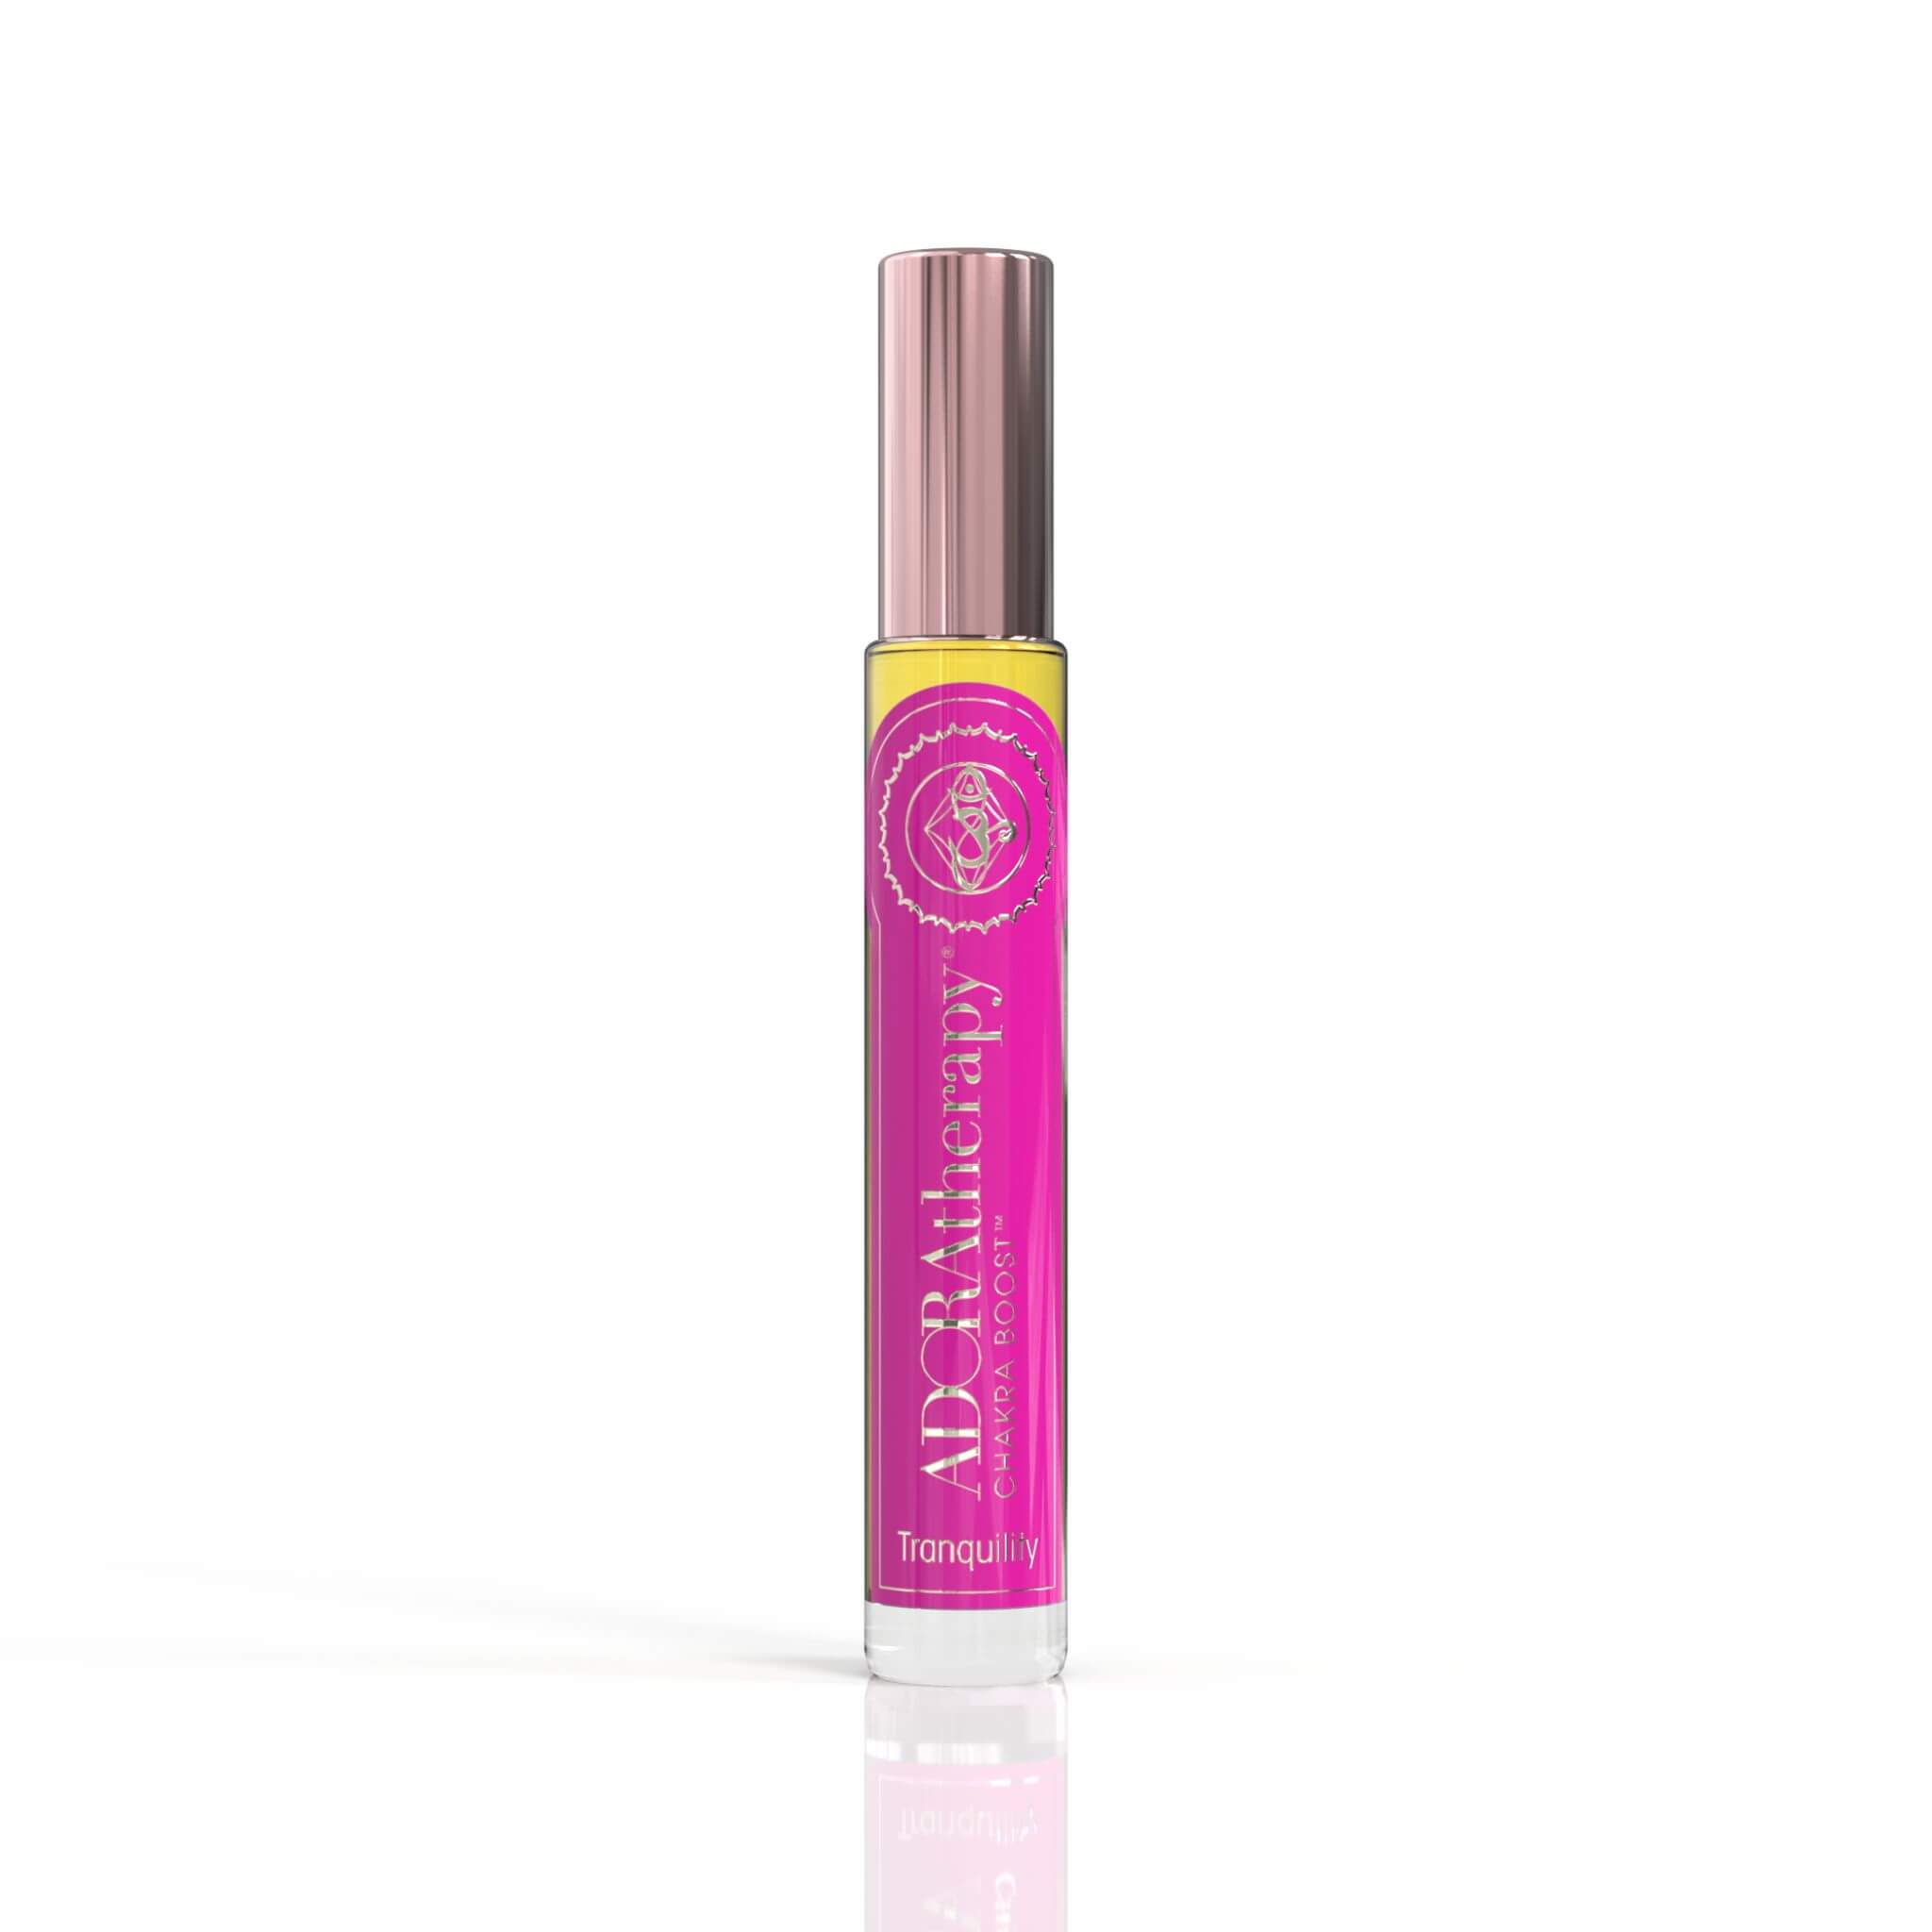 Chakra 7 Tranquility Roll On Perfume Oil 10ML